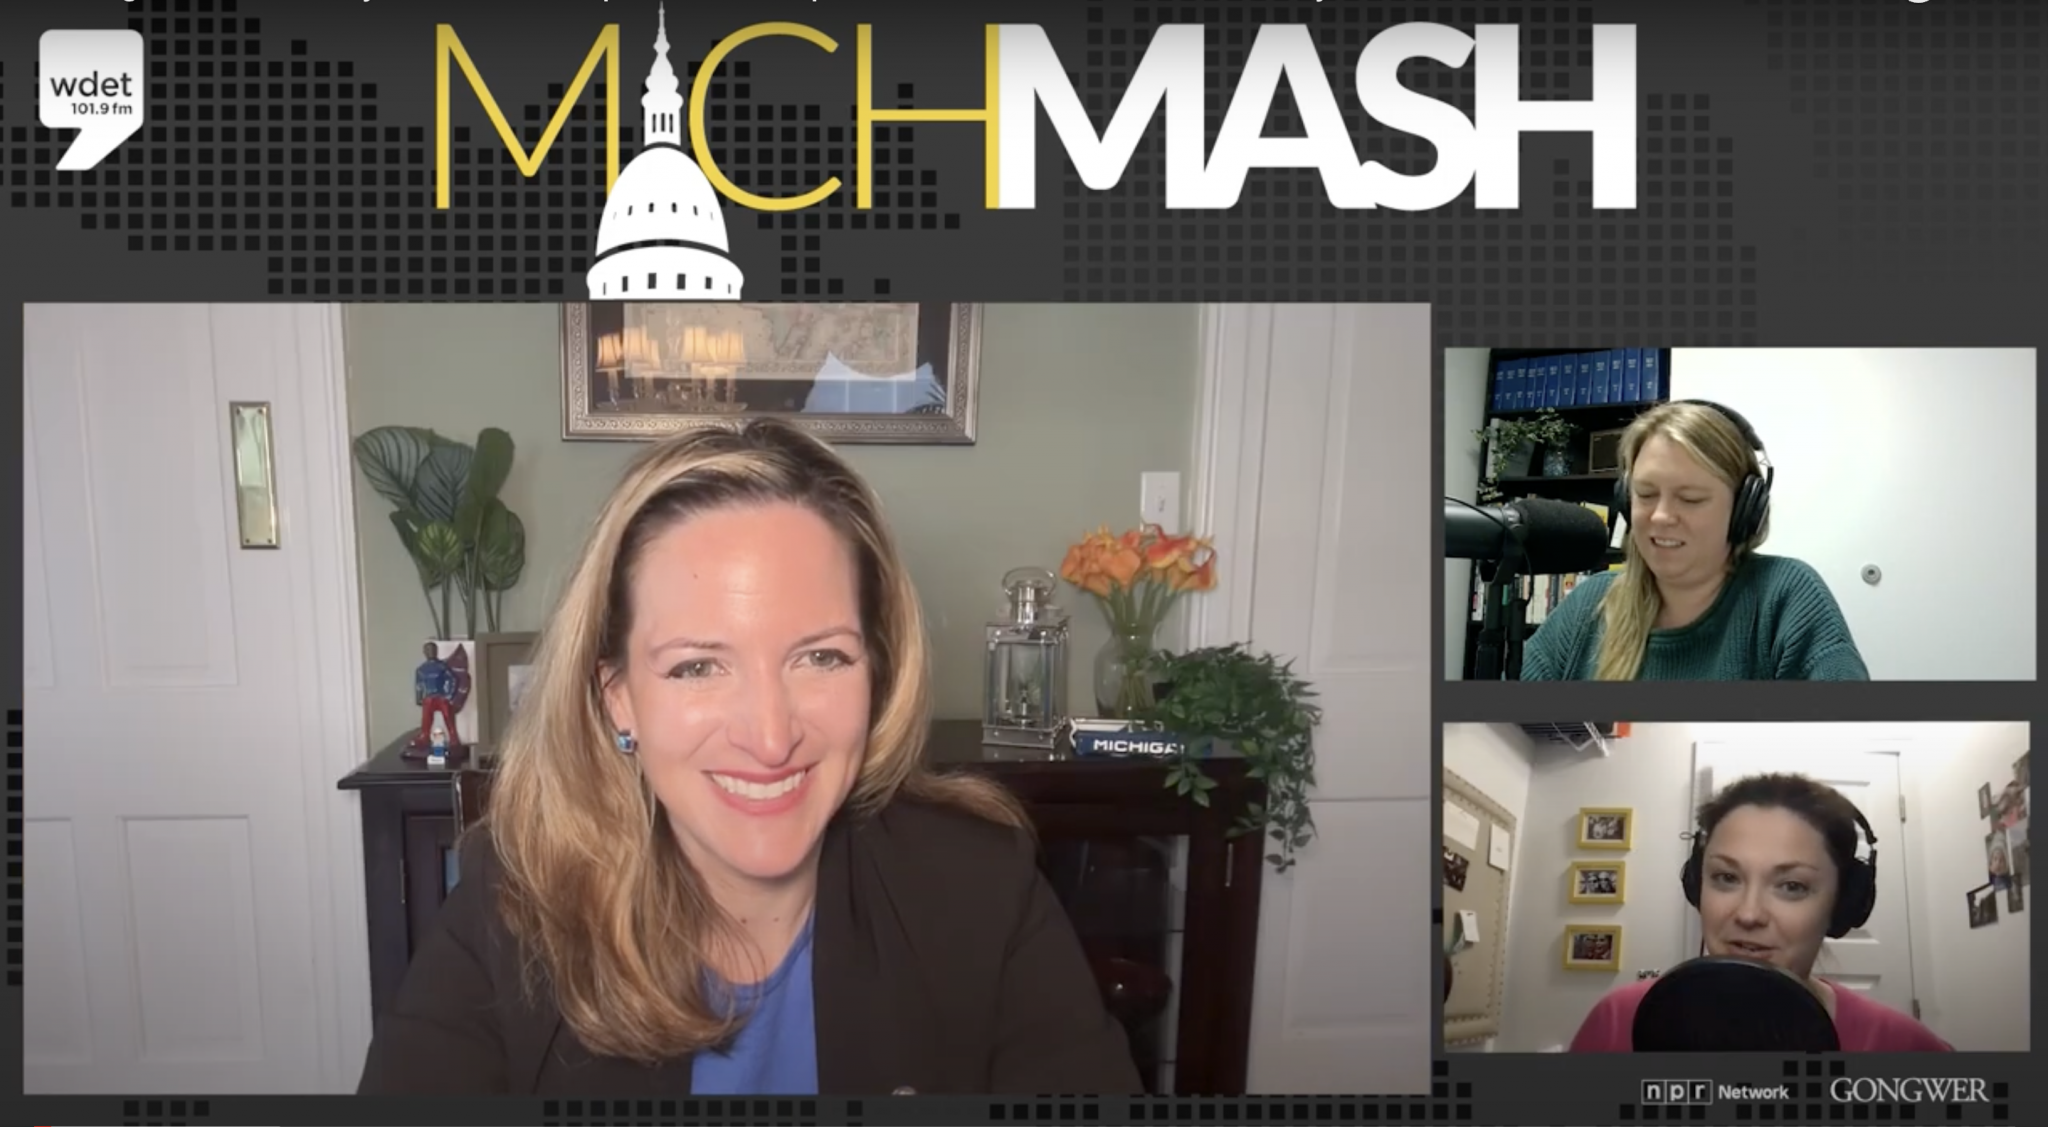 Michigan Secretary of State Jocelyn Benson joined "MichMash" host Cheyna Roth and Gongwer's Alethia Kasban to discuss early voting and boosting voter confidence ahead of the 2024 presidential primary.